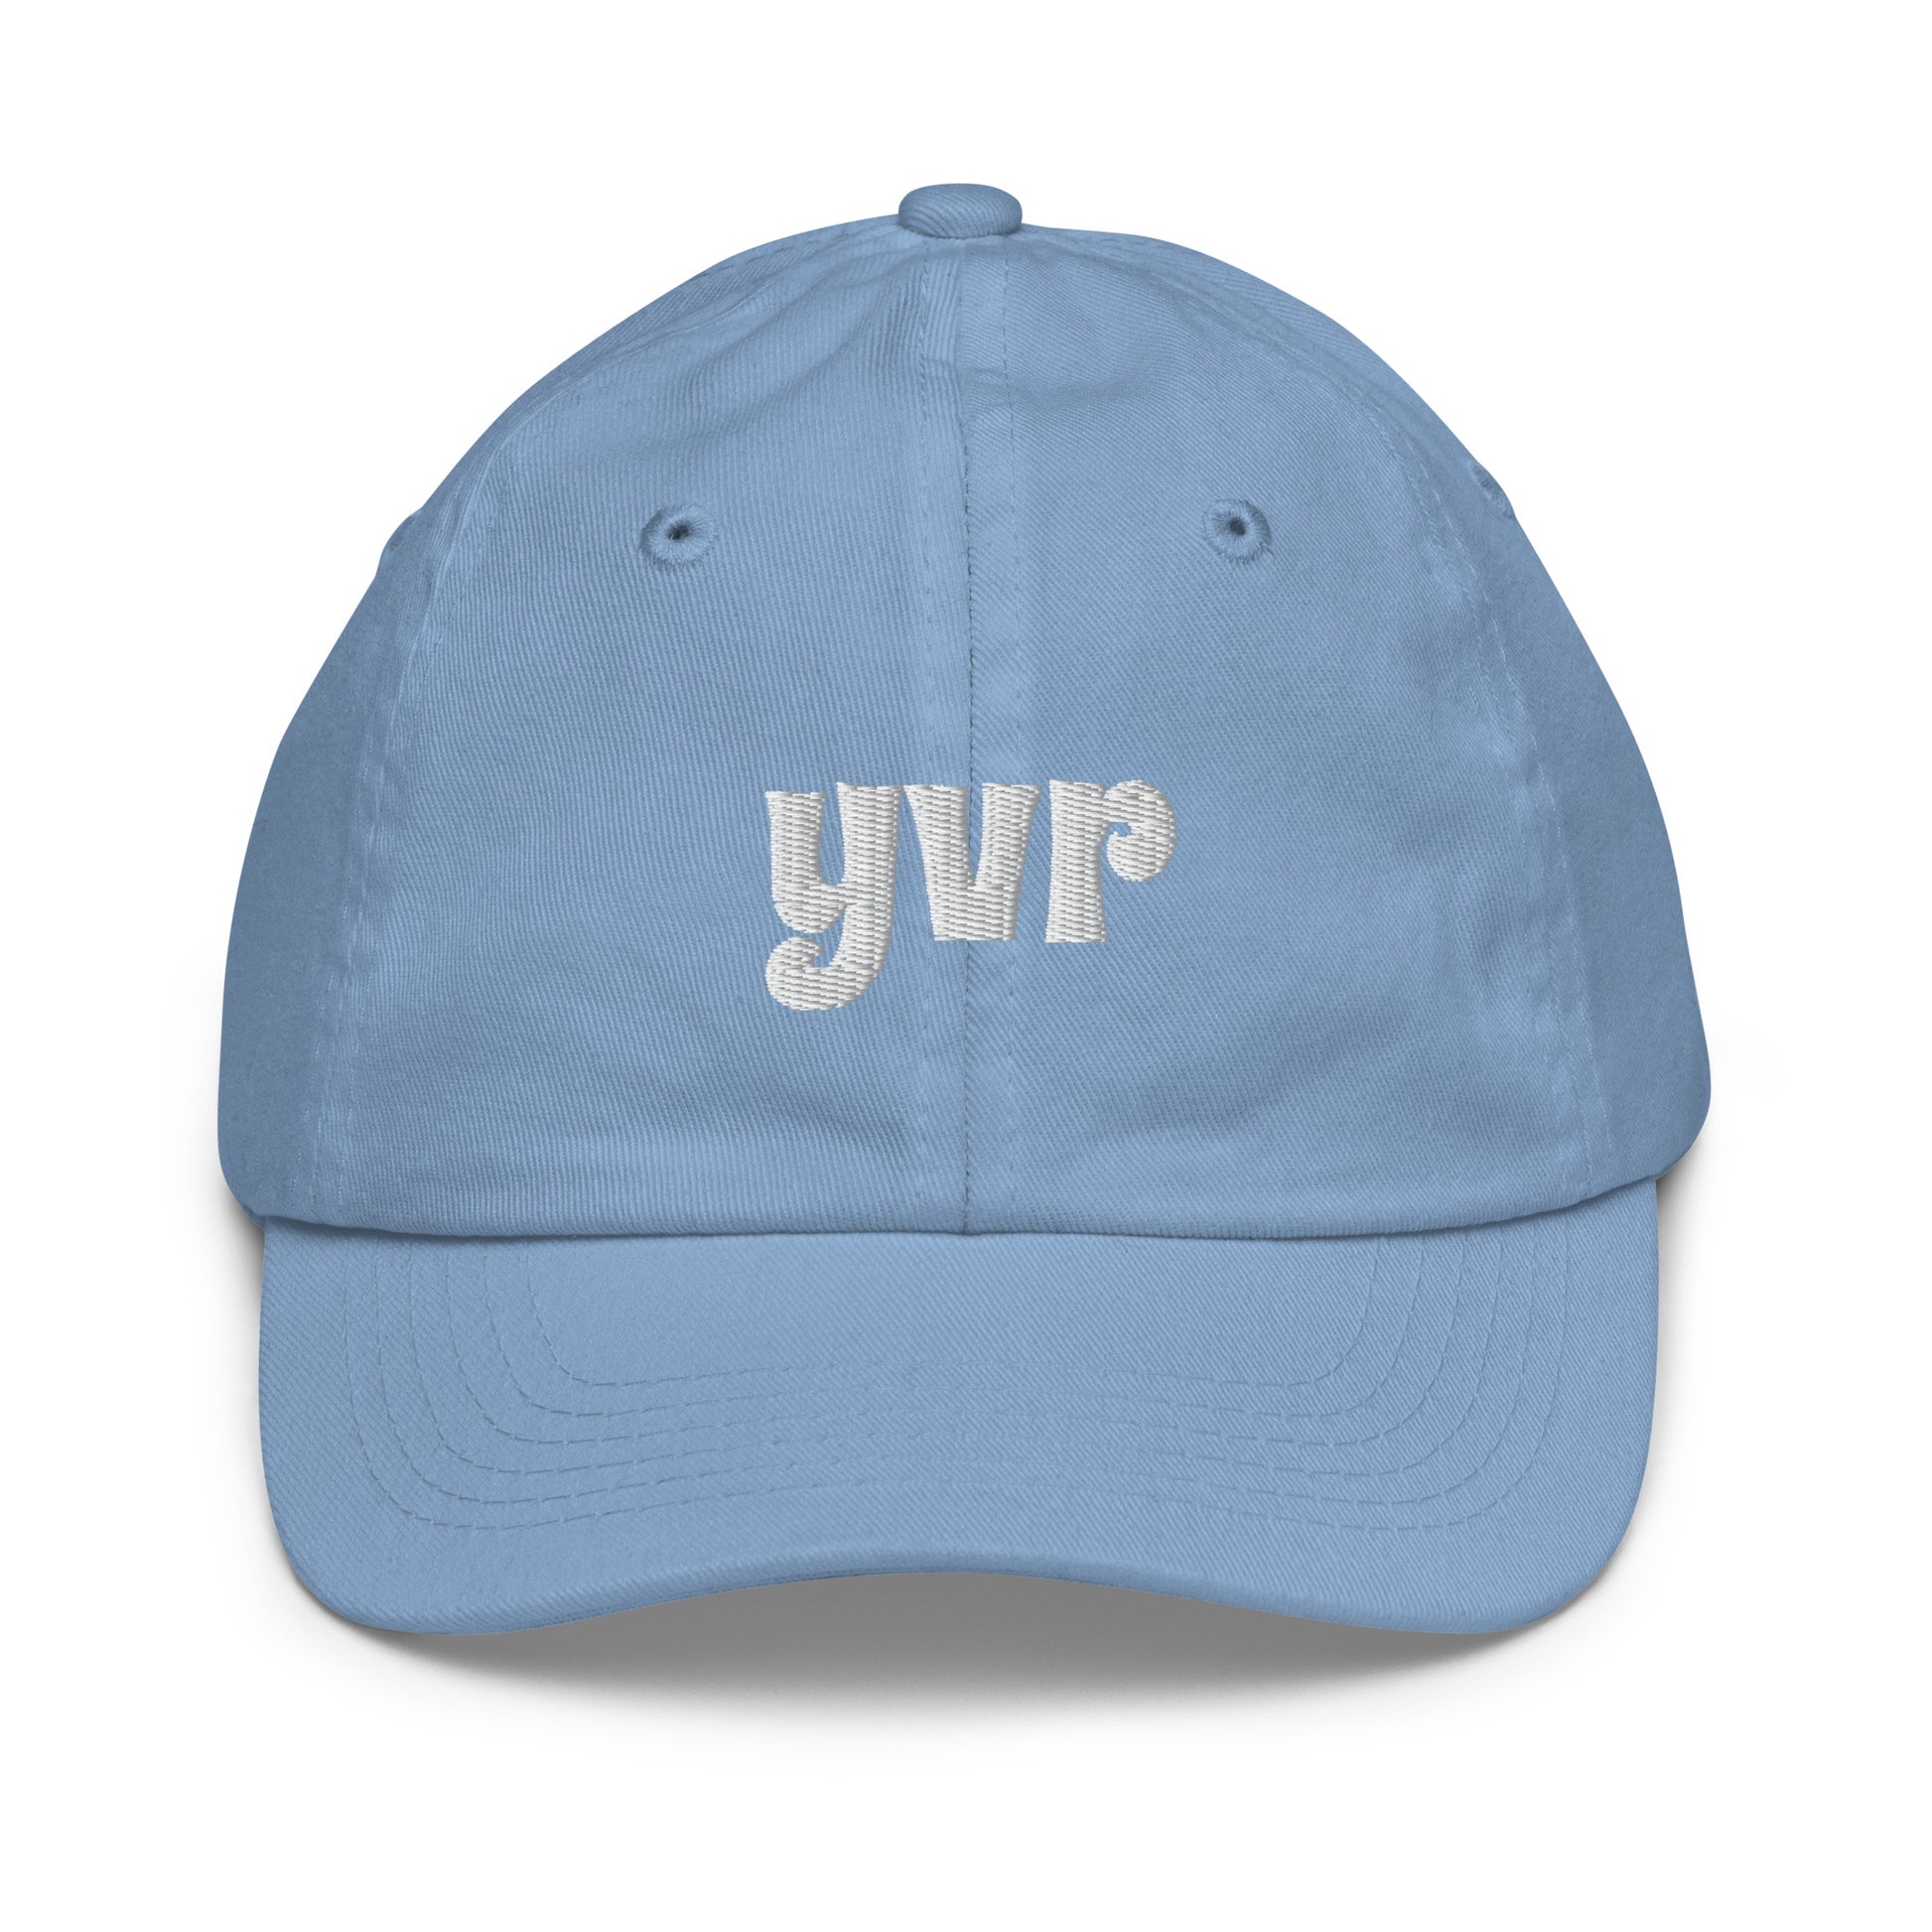 Groovy Kid's Baseball Cap - White • YVR Vancouver • YHM Designs - Image 17